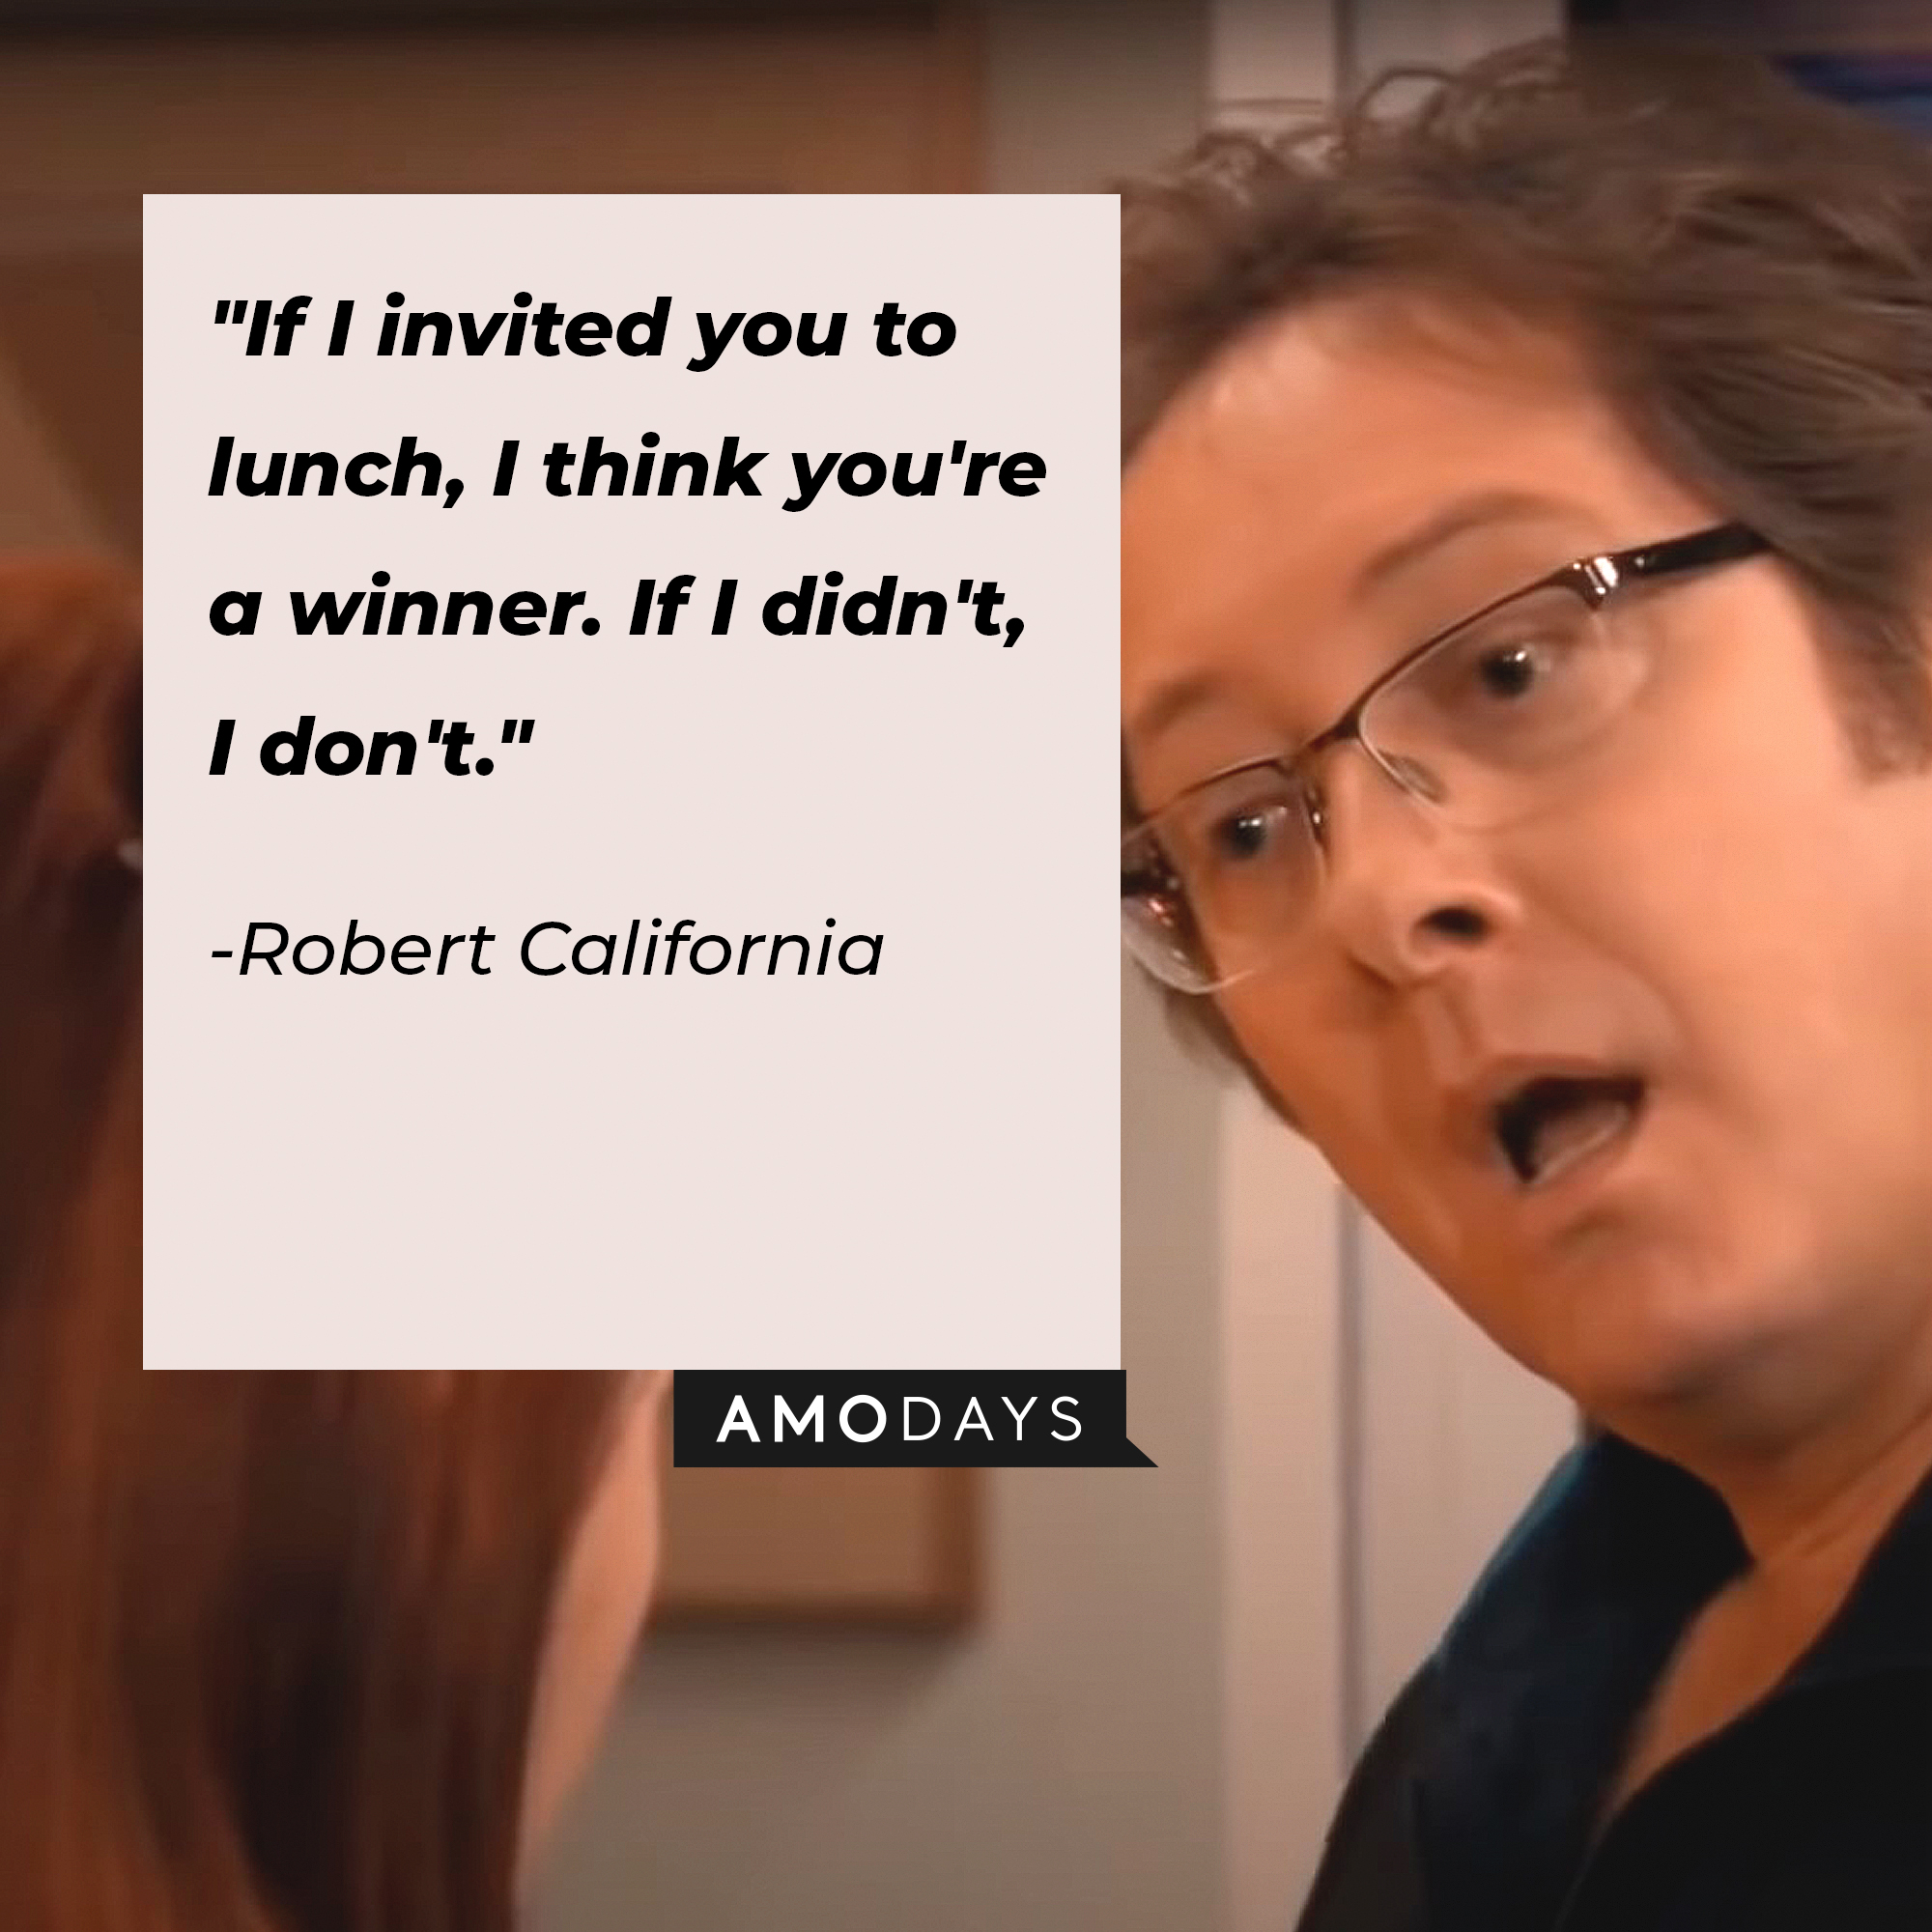 Robert California's quote: "If I invited you to lunch, I think you're a winner. If I didn't, I don't." | Image: AmoDays